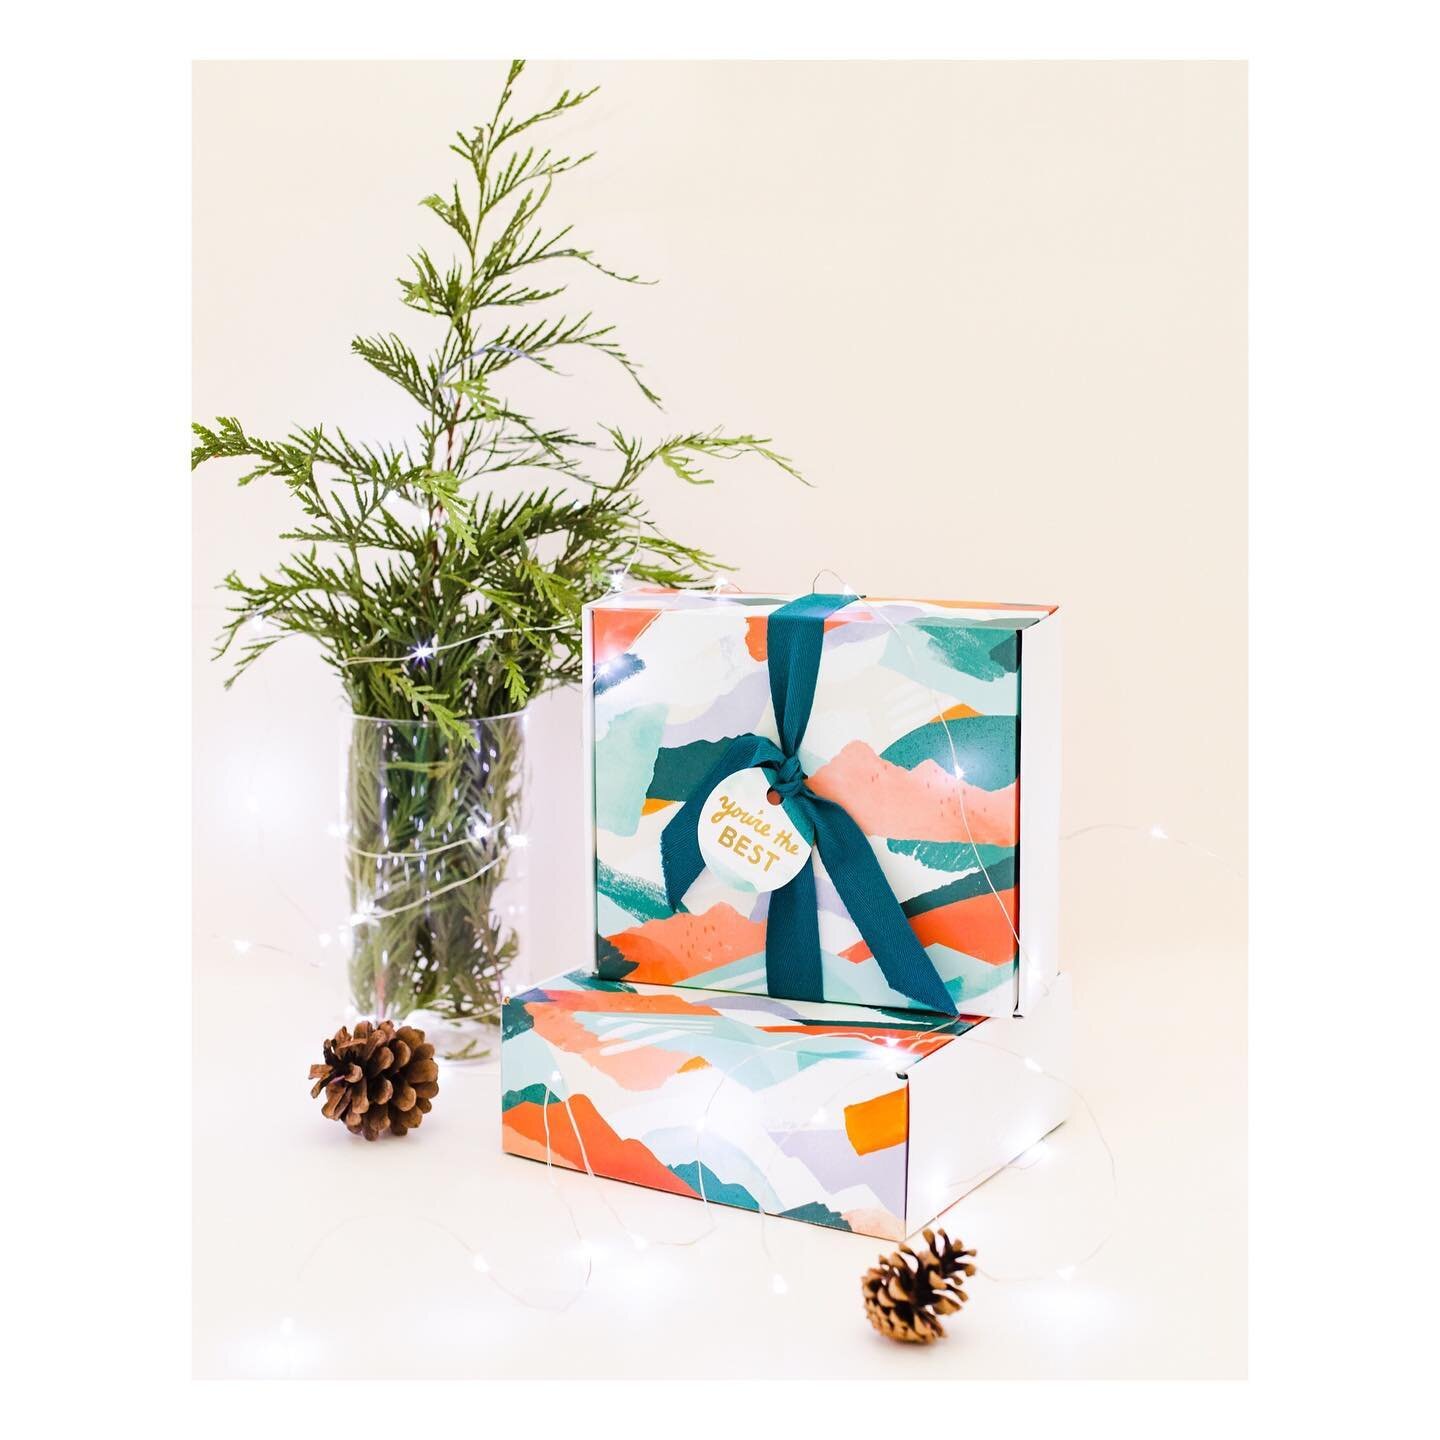 A special pattern for @rockymountainsoapco this festive season with a set of choose-your-own gift tags hand painted by us! These boxes need no wrapping paper and are meant to be reused any time of year for anyone!🌲 Photos taken by @camillenathania